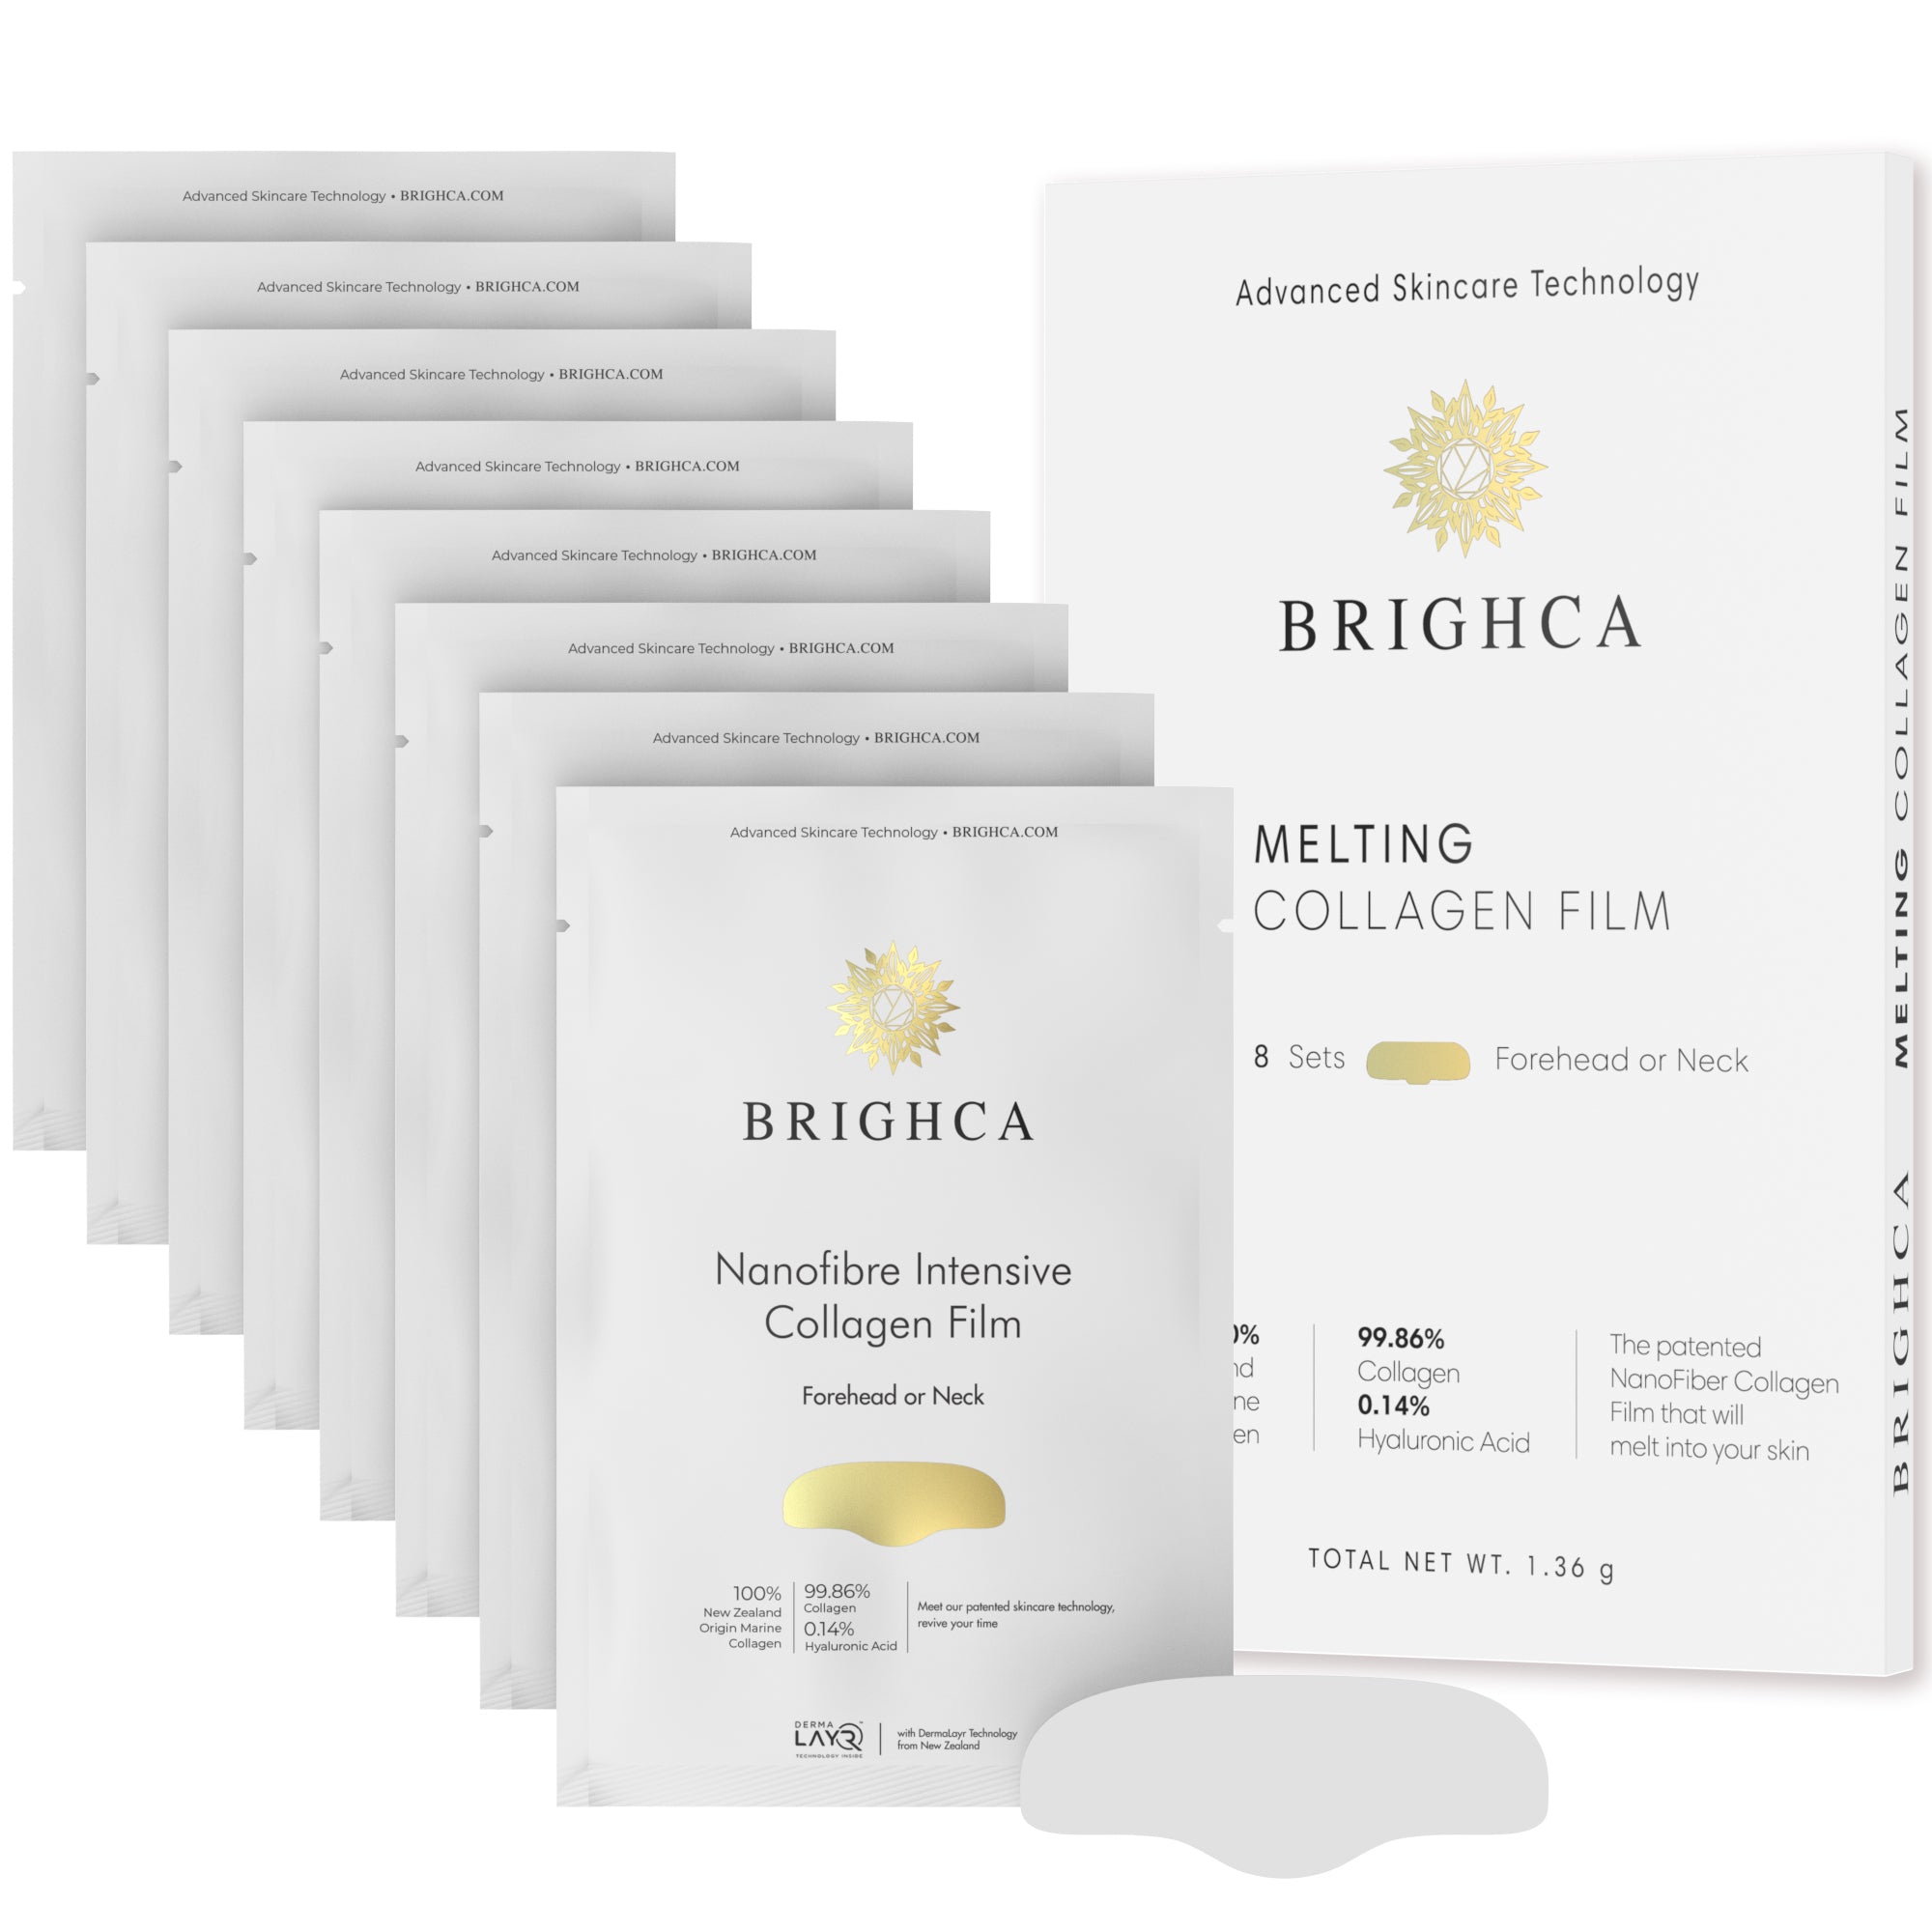 Melting Nanofiber Collagen Film Face Treatment Brighca for anti-aging, lifting, firming, hydrating Forehead or Neck